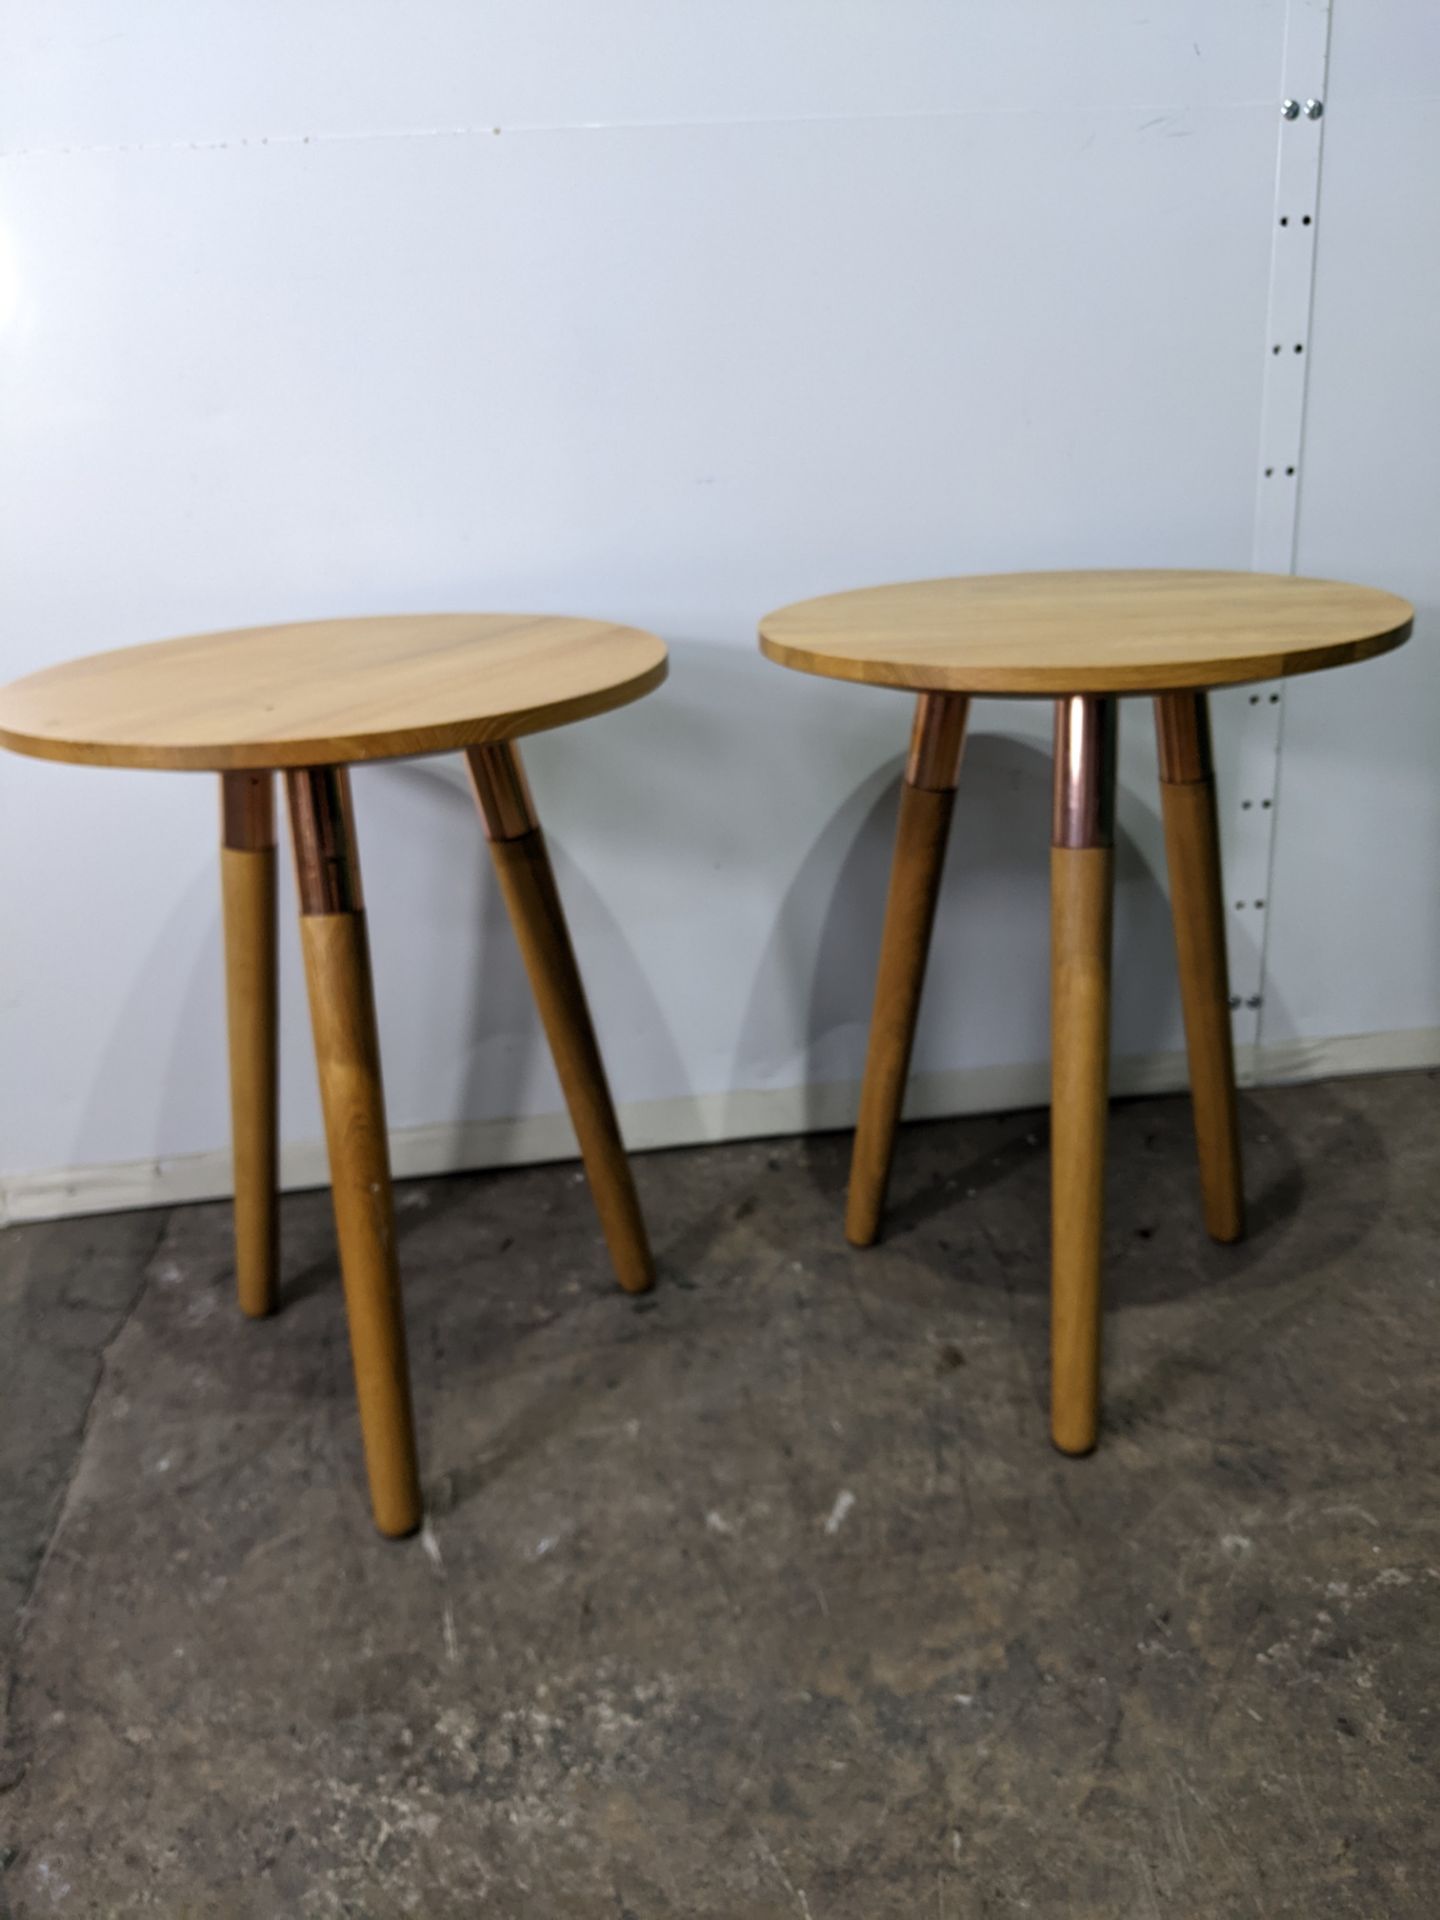 2 x Round Wooden 3 Legged Side Tables - Image 4 of 4